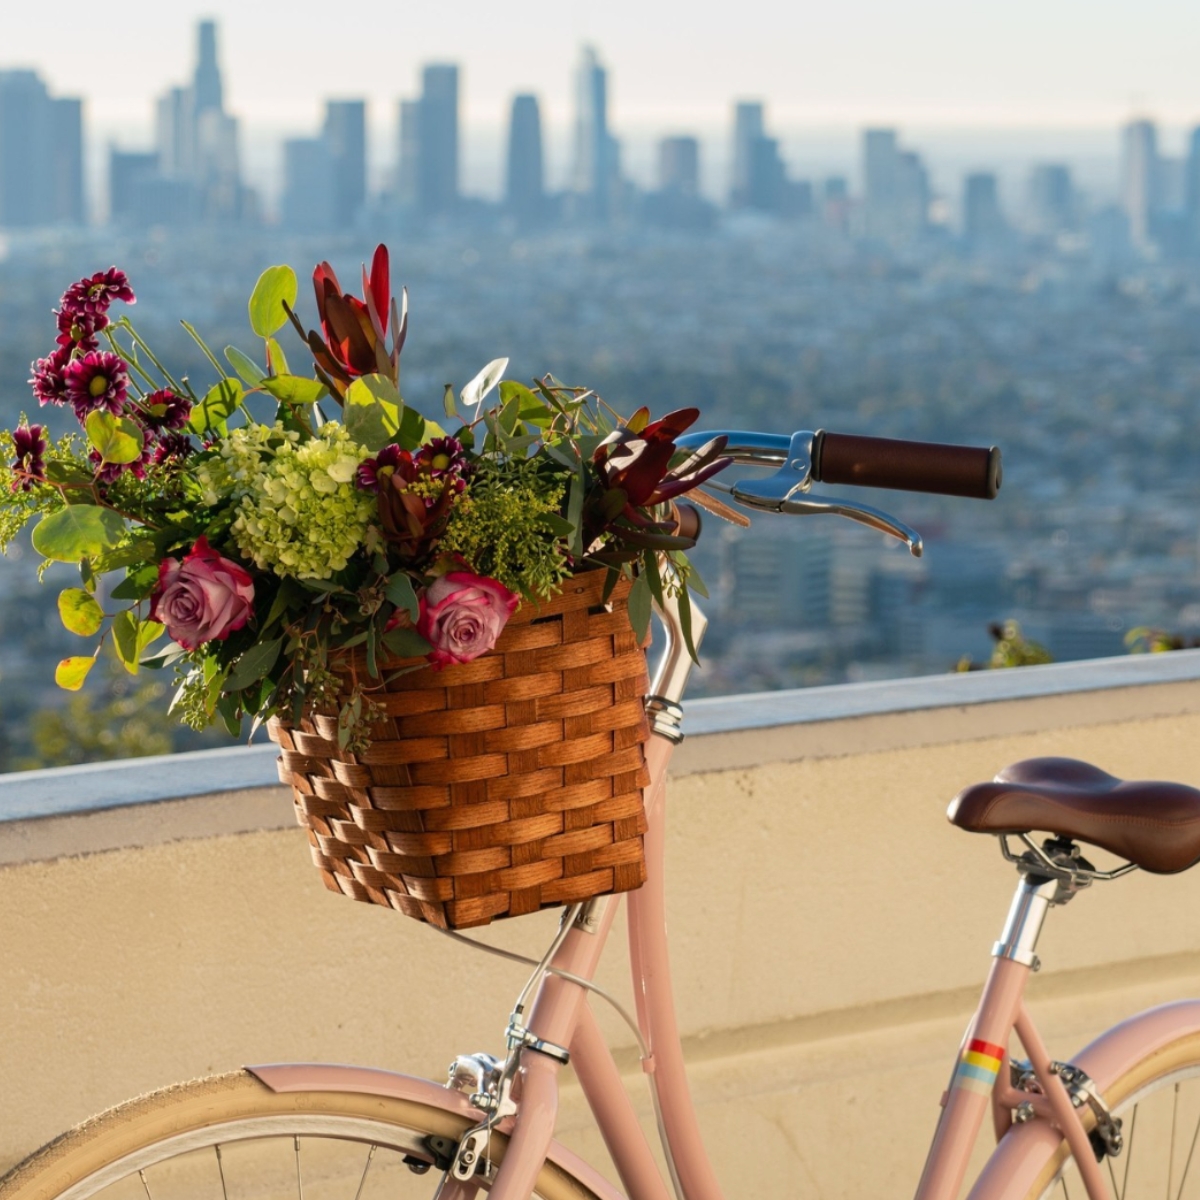 Bike basket with flowers on balcony overlooking a city